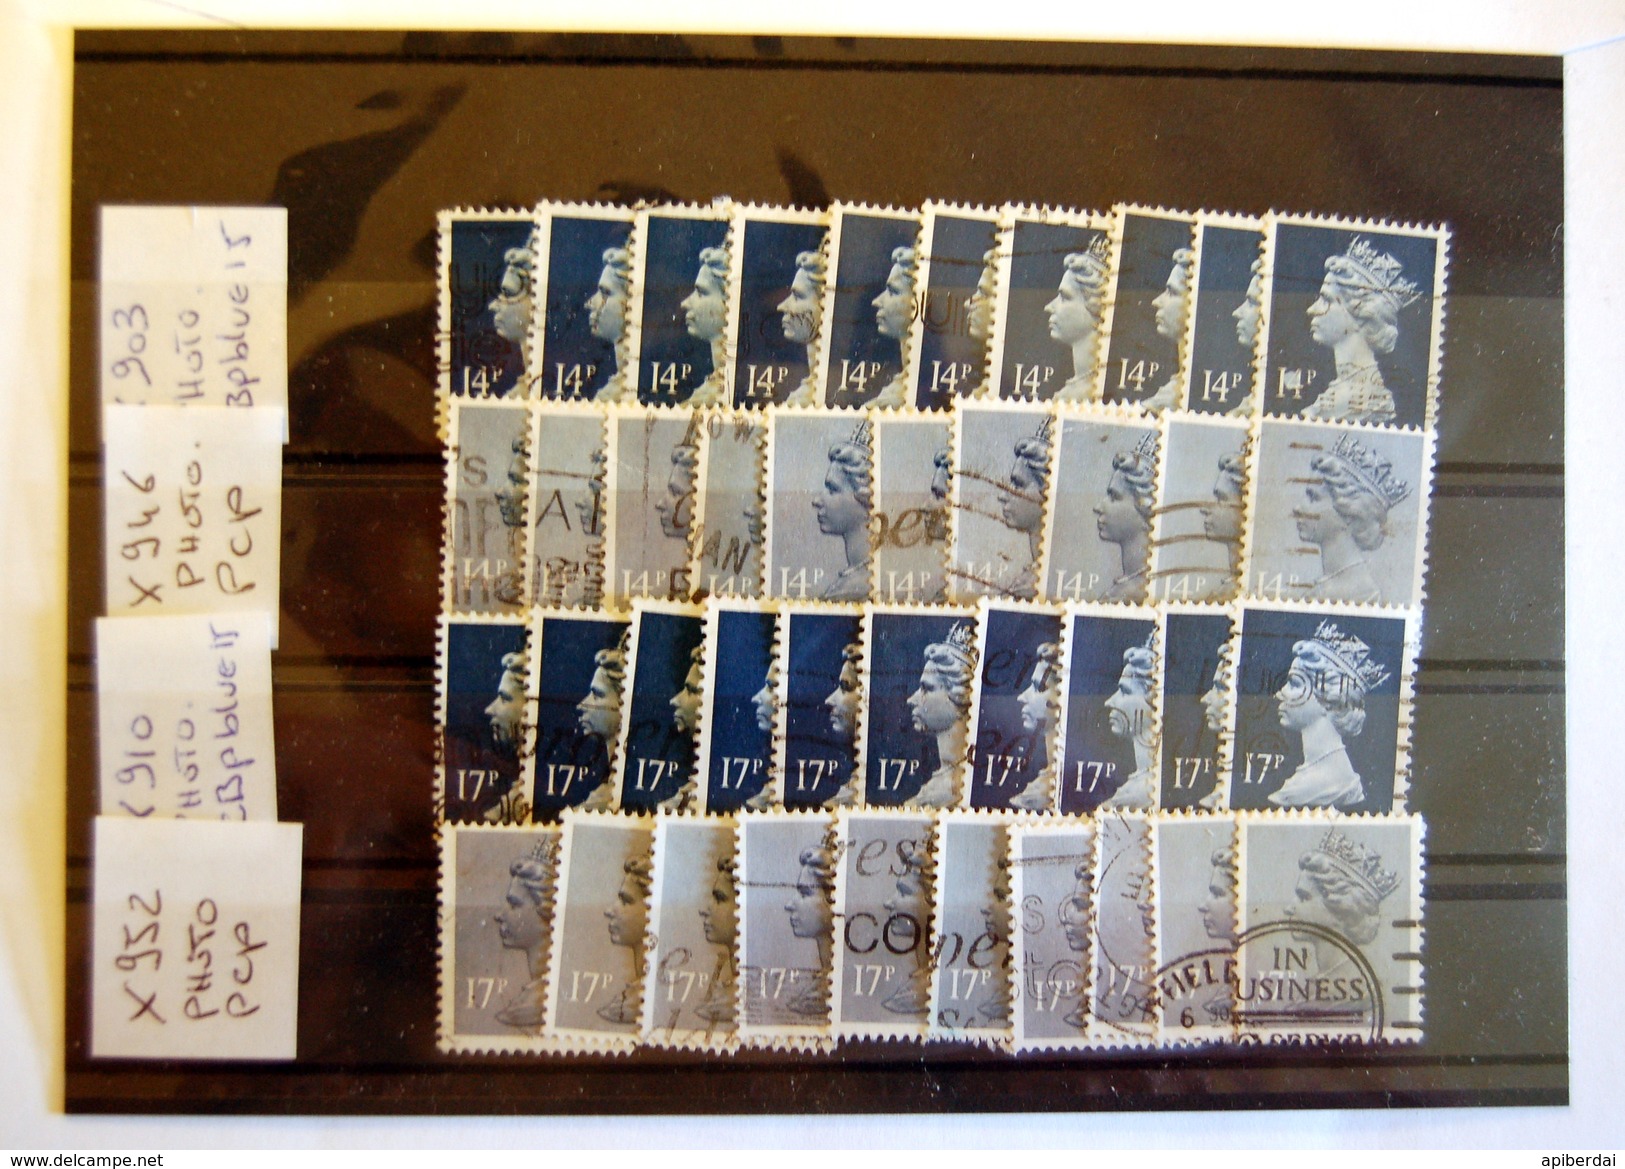 Great Britain - Machin 14p & 17p In 2 Differents Colours Each  - 40 Stamps (4 * 10) - Machins